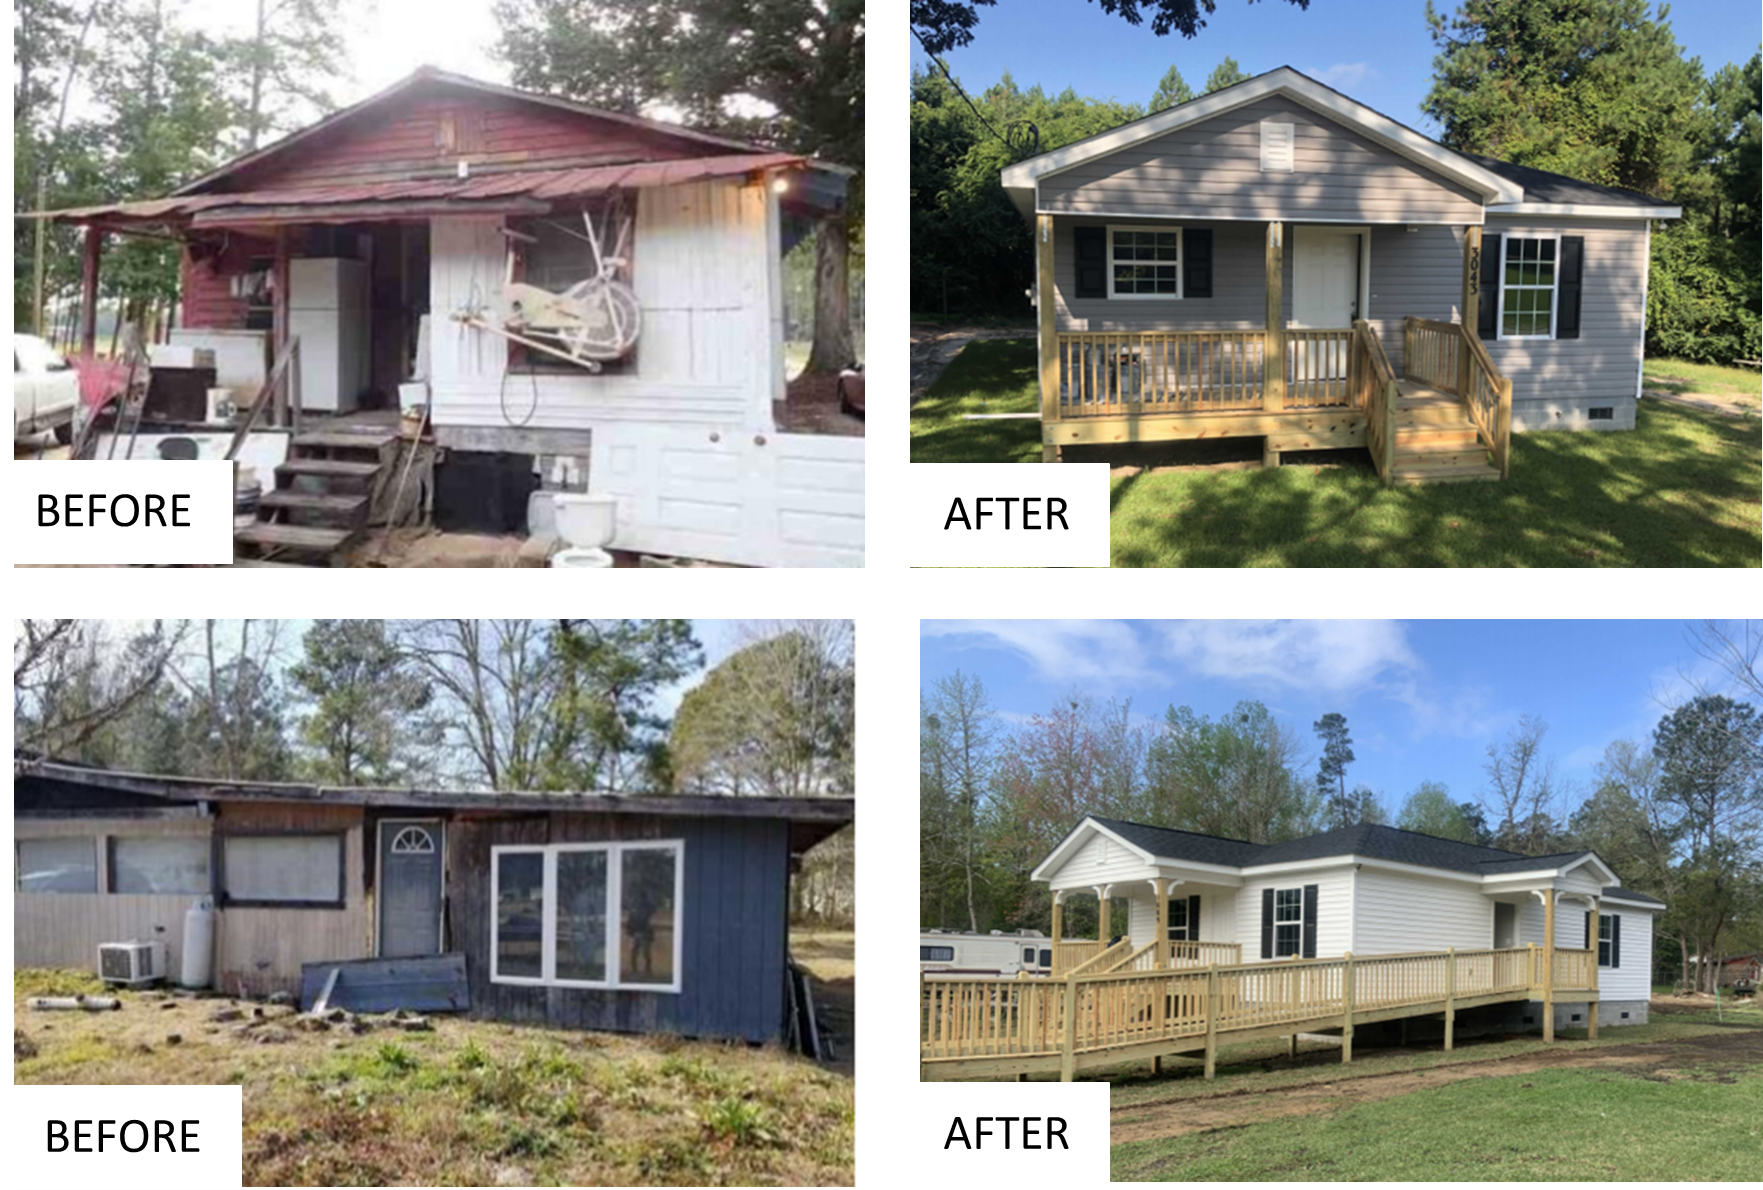 Two side-by-side examples of properties before and after repairs and/or rebuilds were completed.